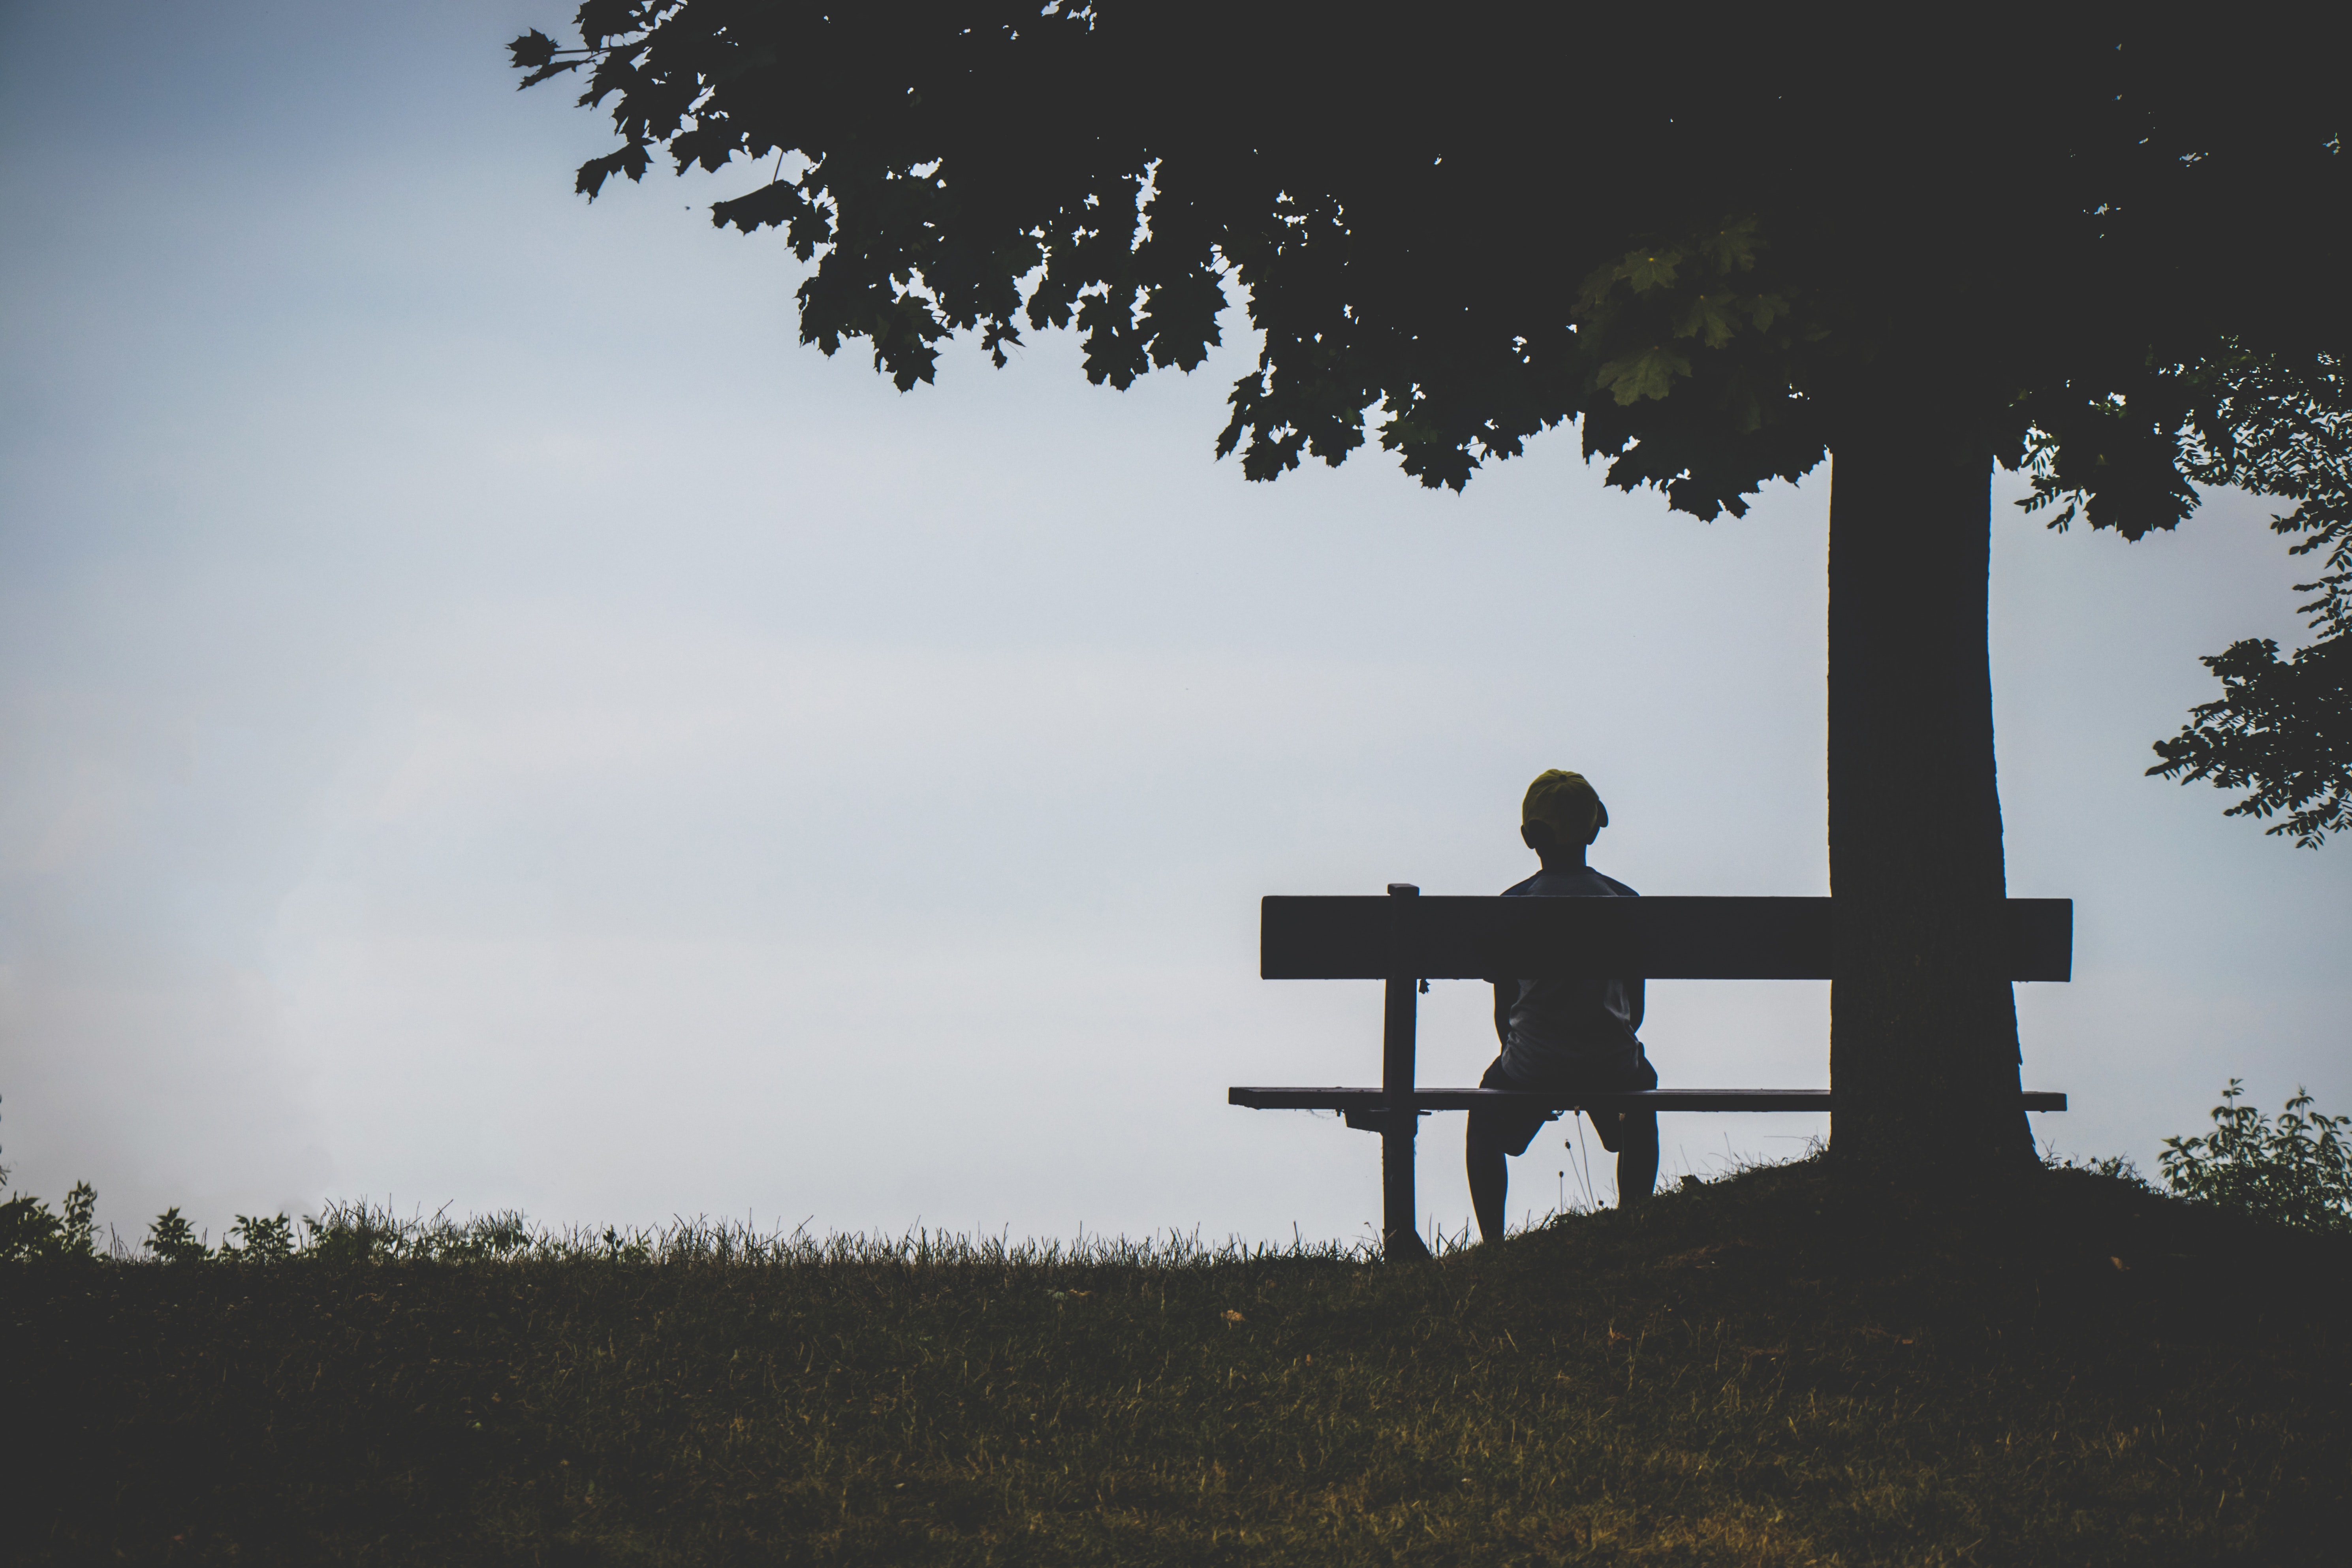 wallpapers alone, privacy, loneliness, silhouette, seclusion, miscellanea, miscellaneous, bench, lonely, child